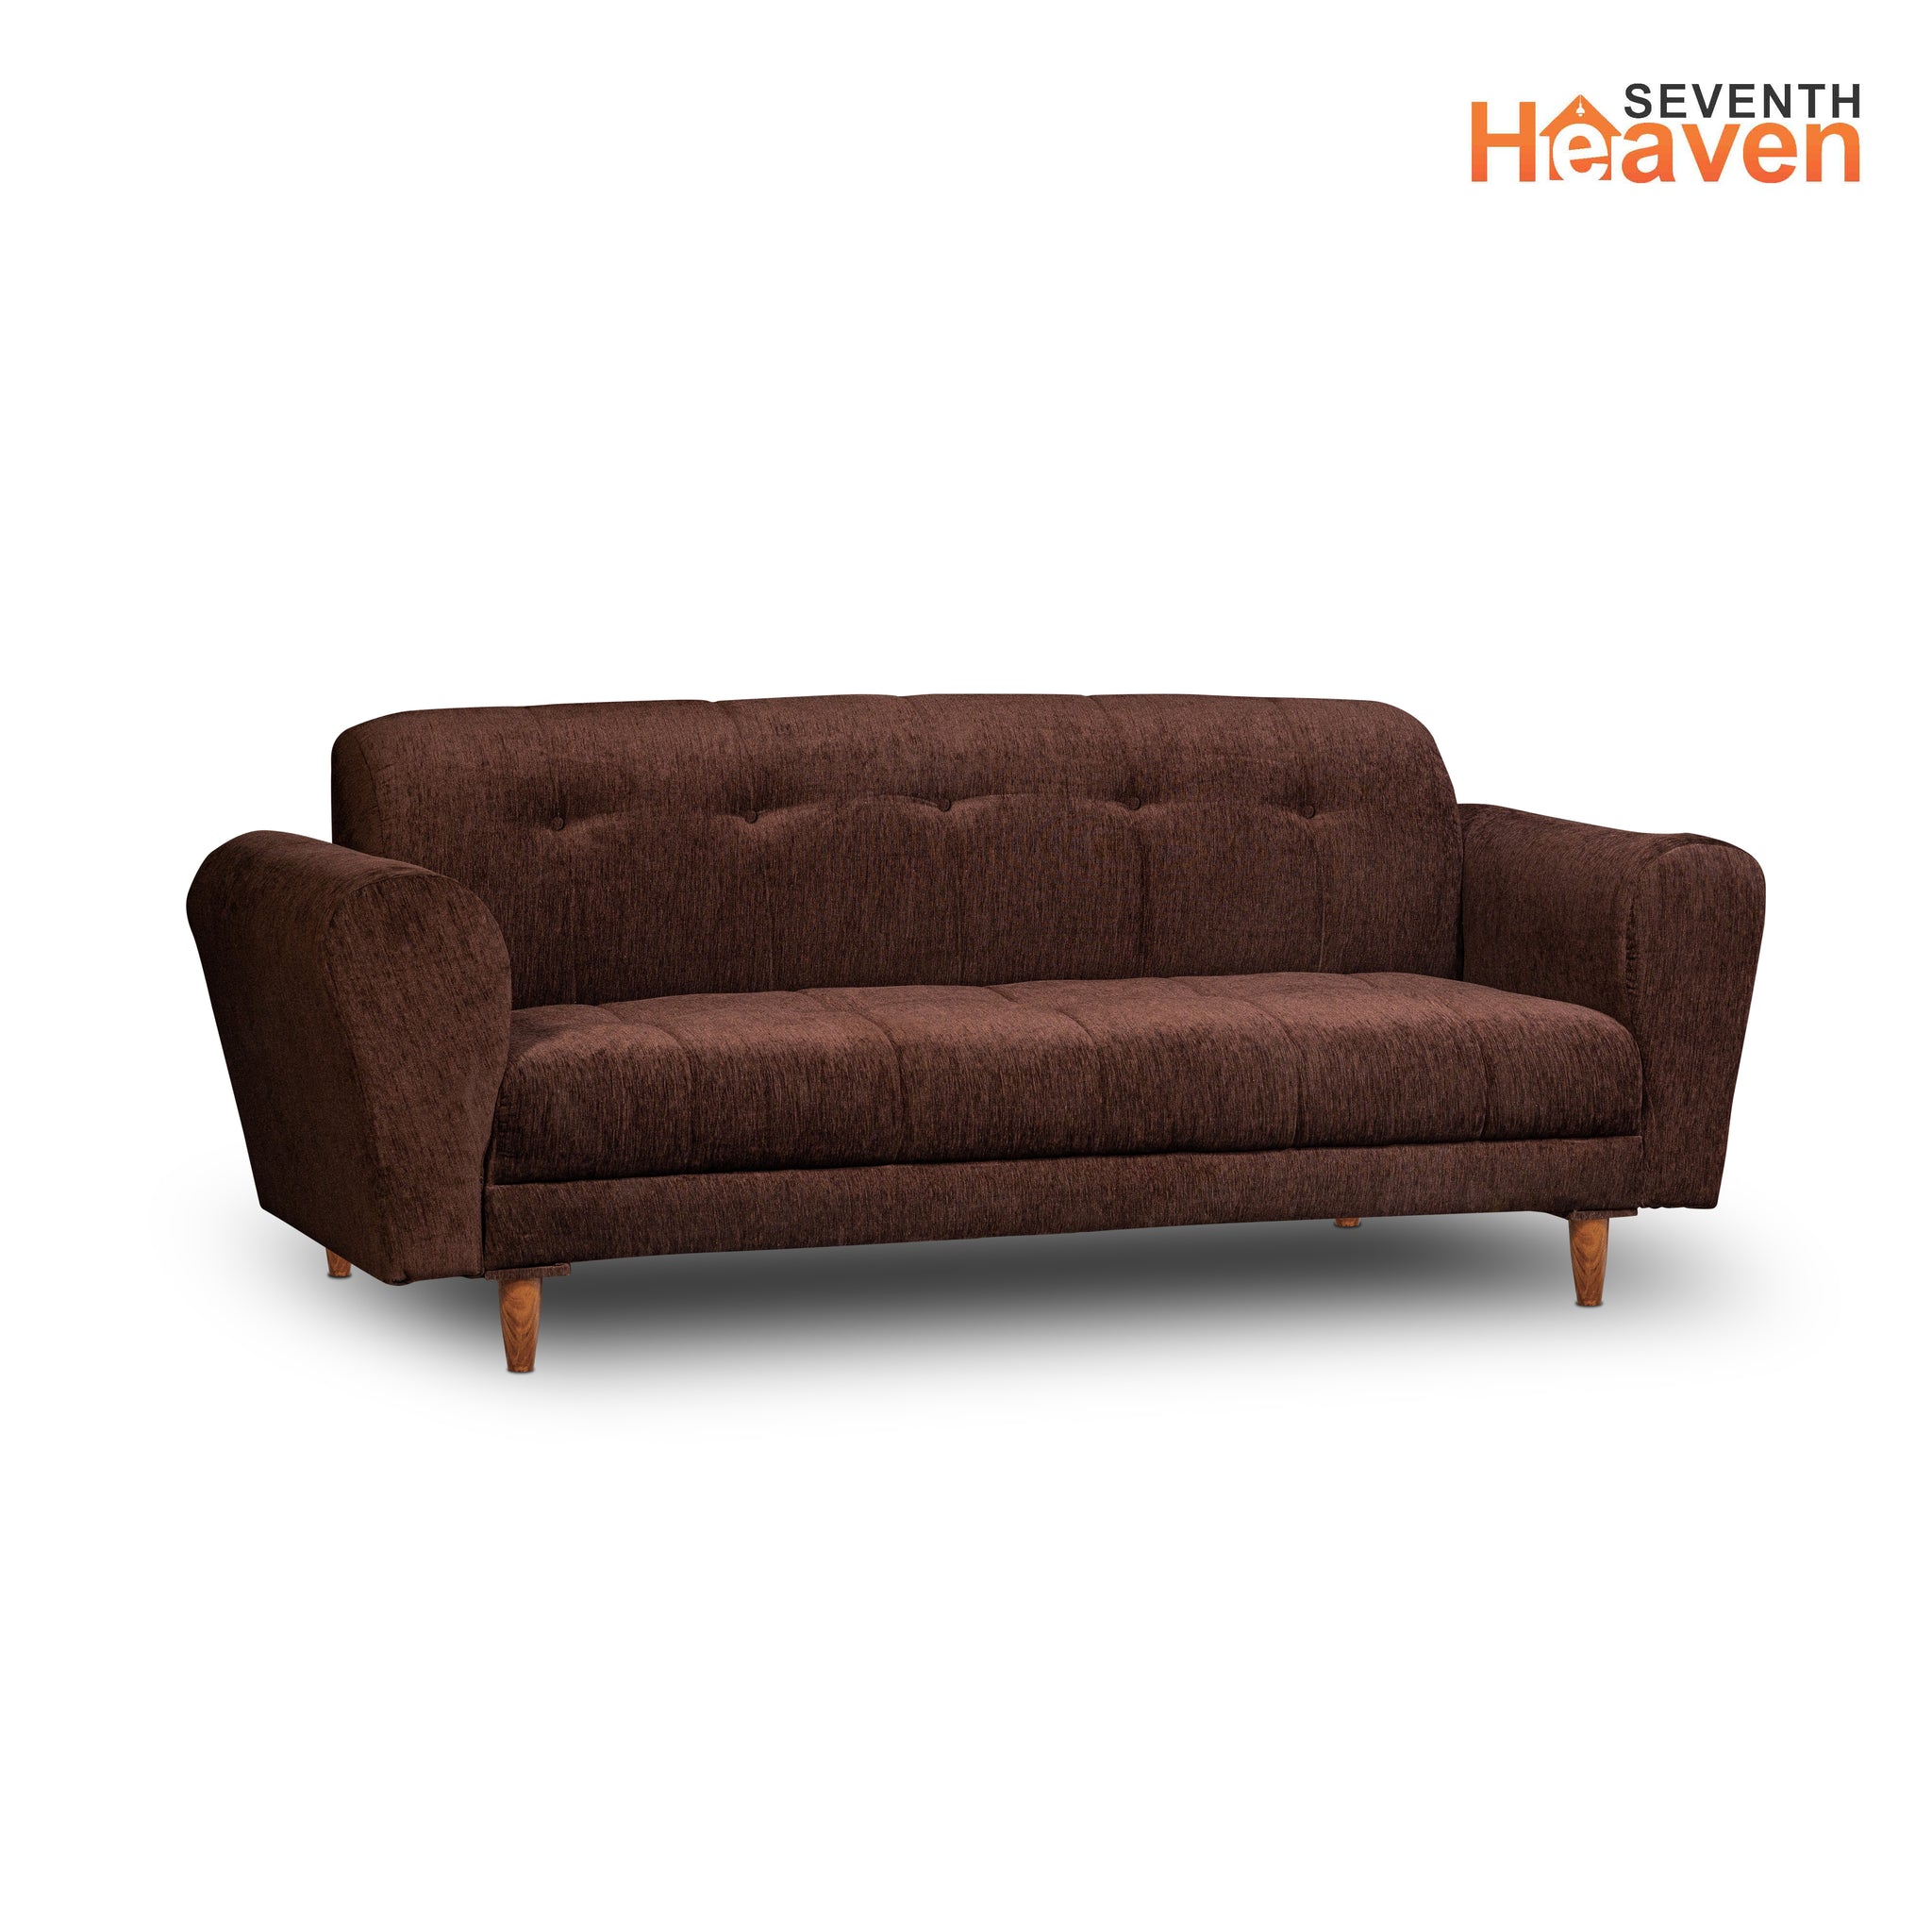 Seventh Heaven Milan 3 Seater Wooden Sofa Set Modern & Elegant Smart Furniture Range for luxurious homes, living rooms and offices. Brown Colour Molphino fabric with sheesham polished wooden legs.